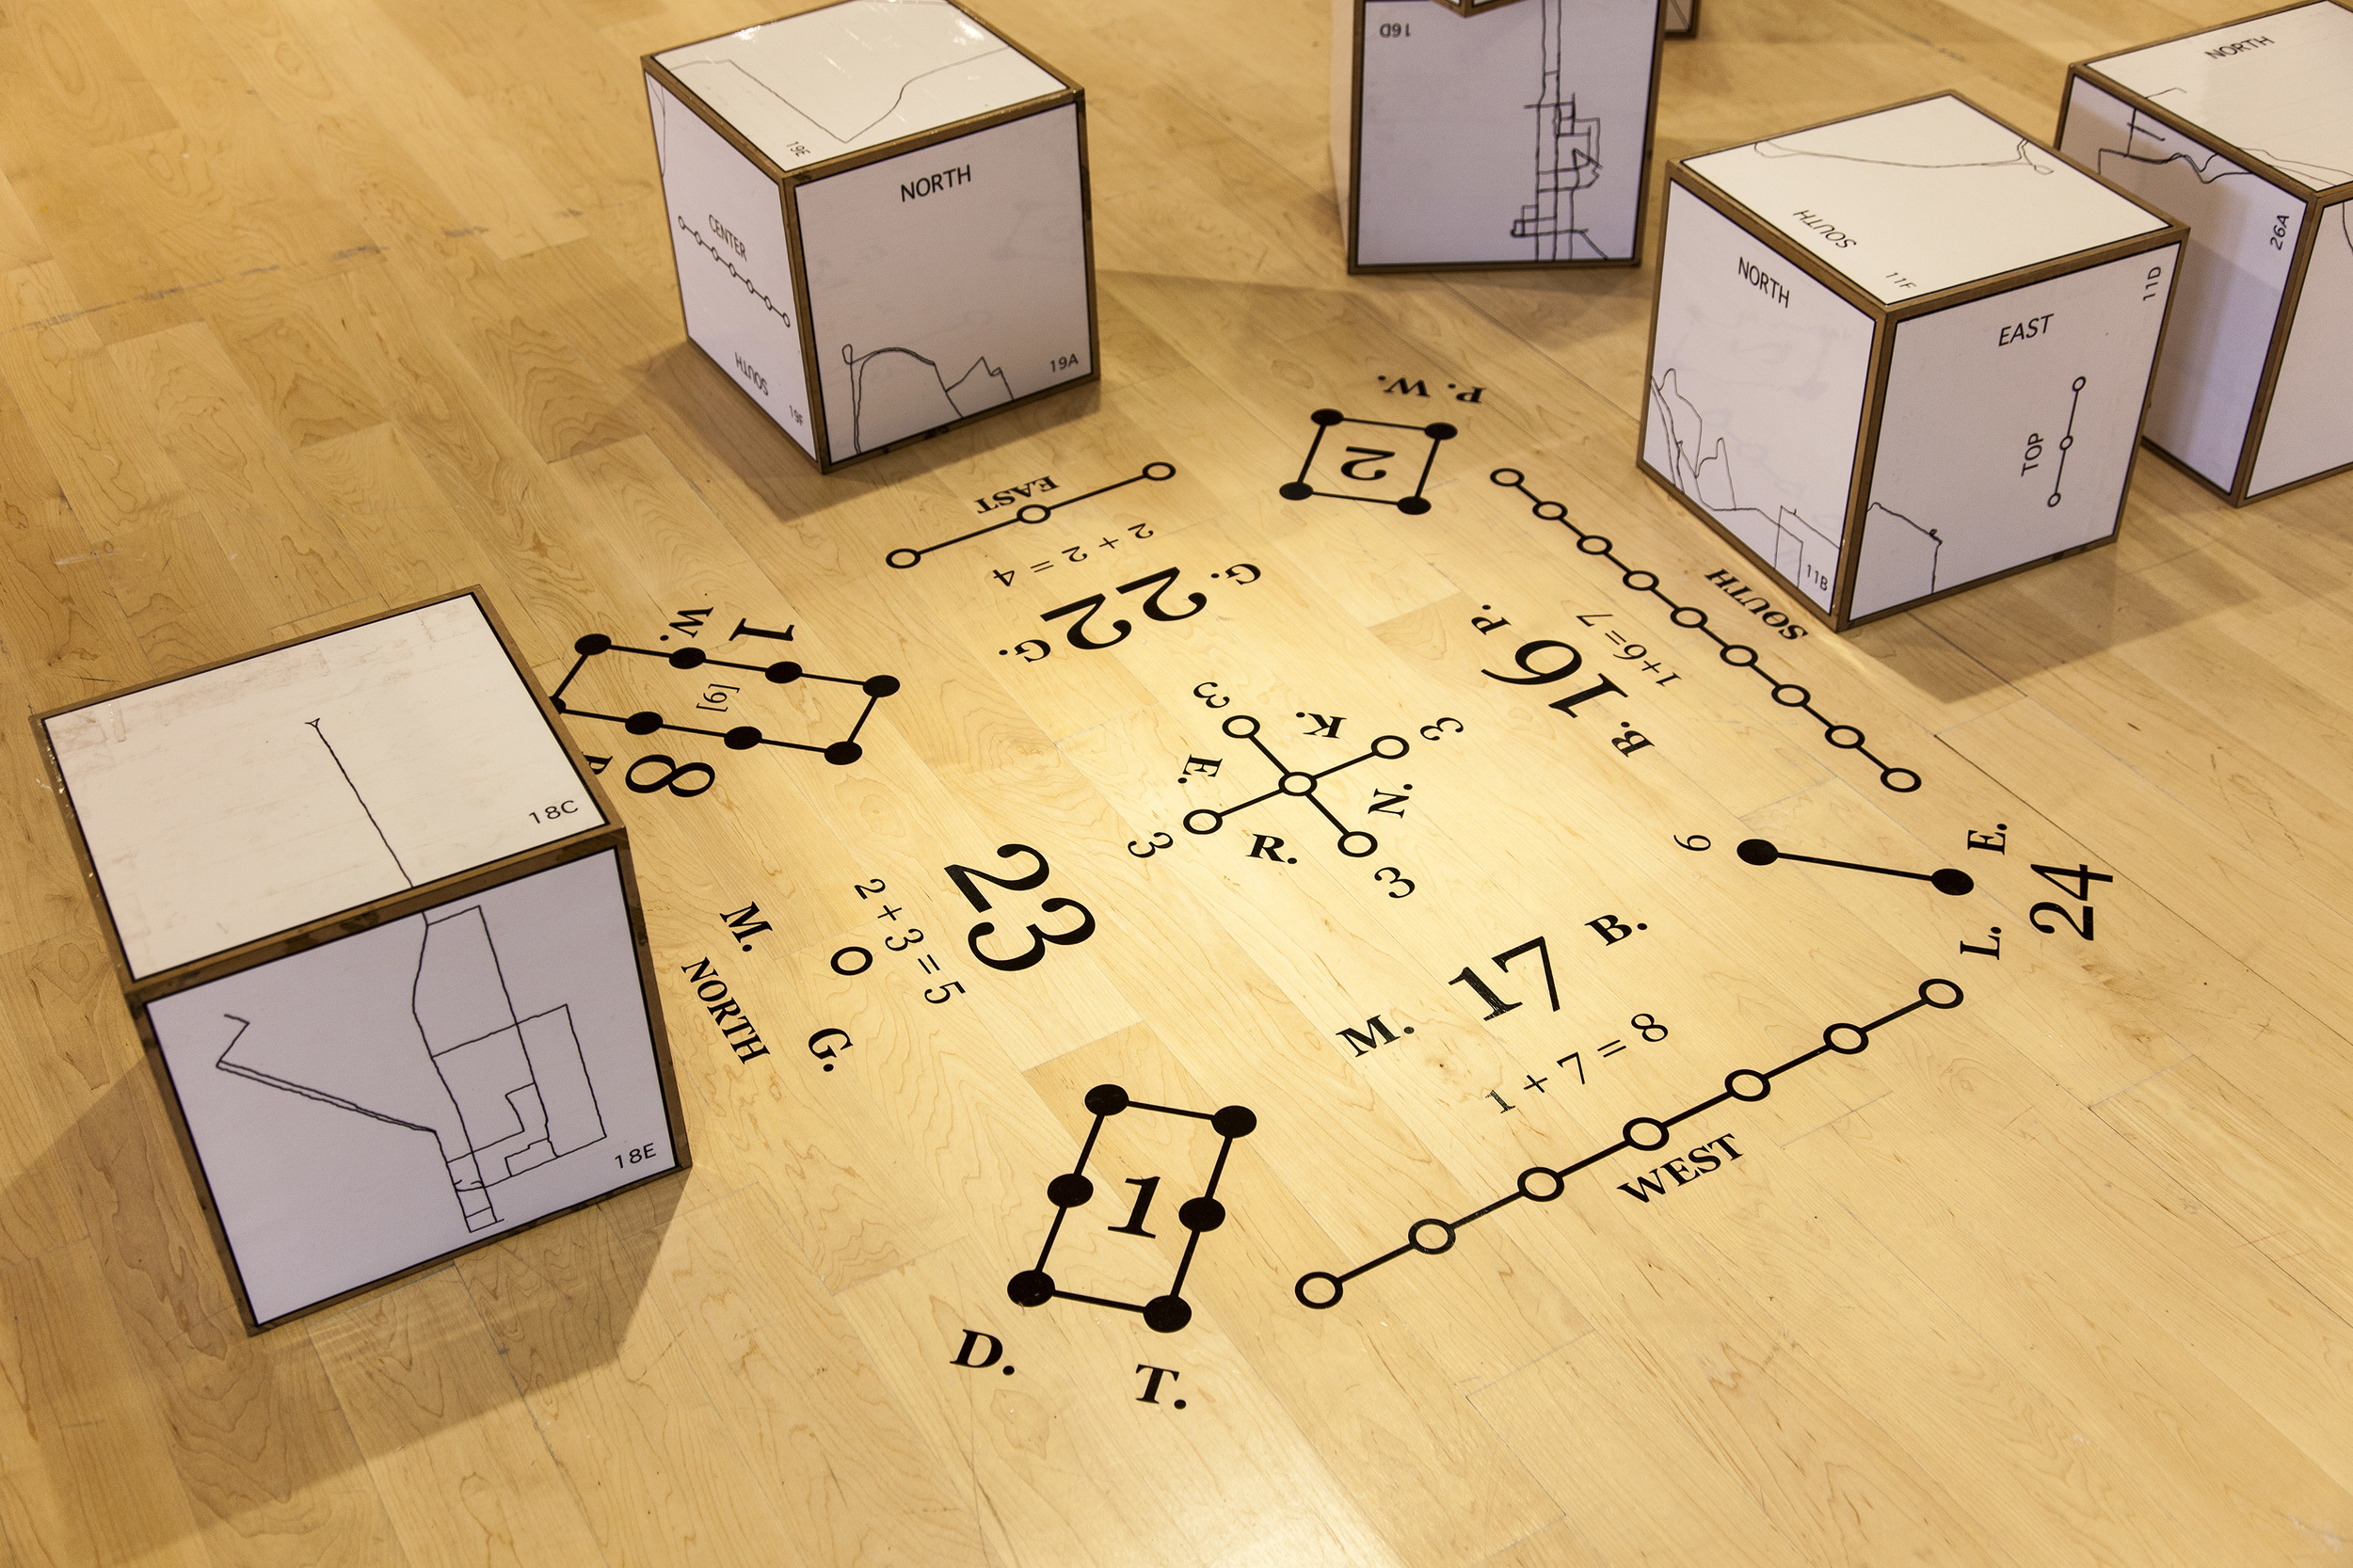   Inspired by magic cubes, Hoylman chose to represent each participant with a cube and number. Each cube was stacked in a certain order to create a perfect cube, representing the interconnection of people in the neighborhood.  